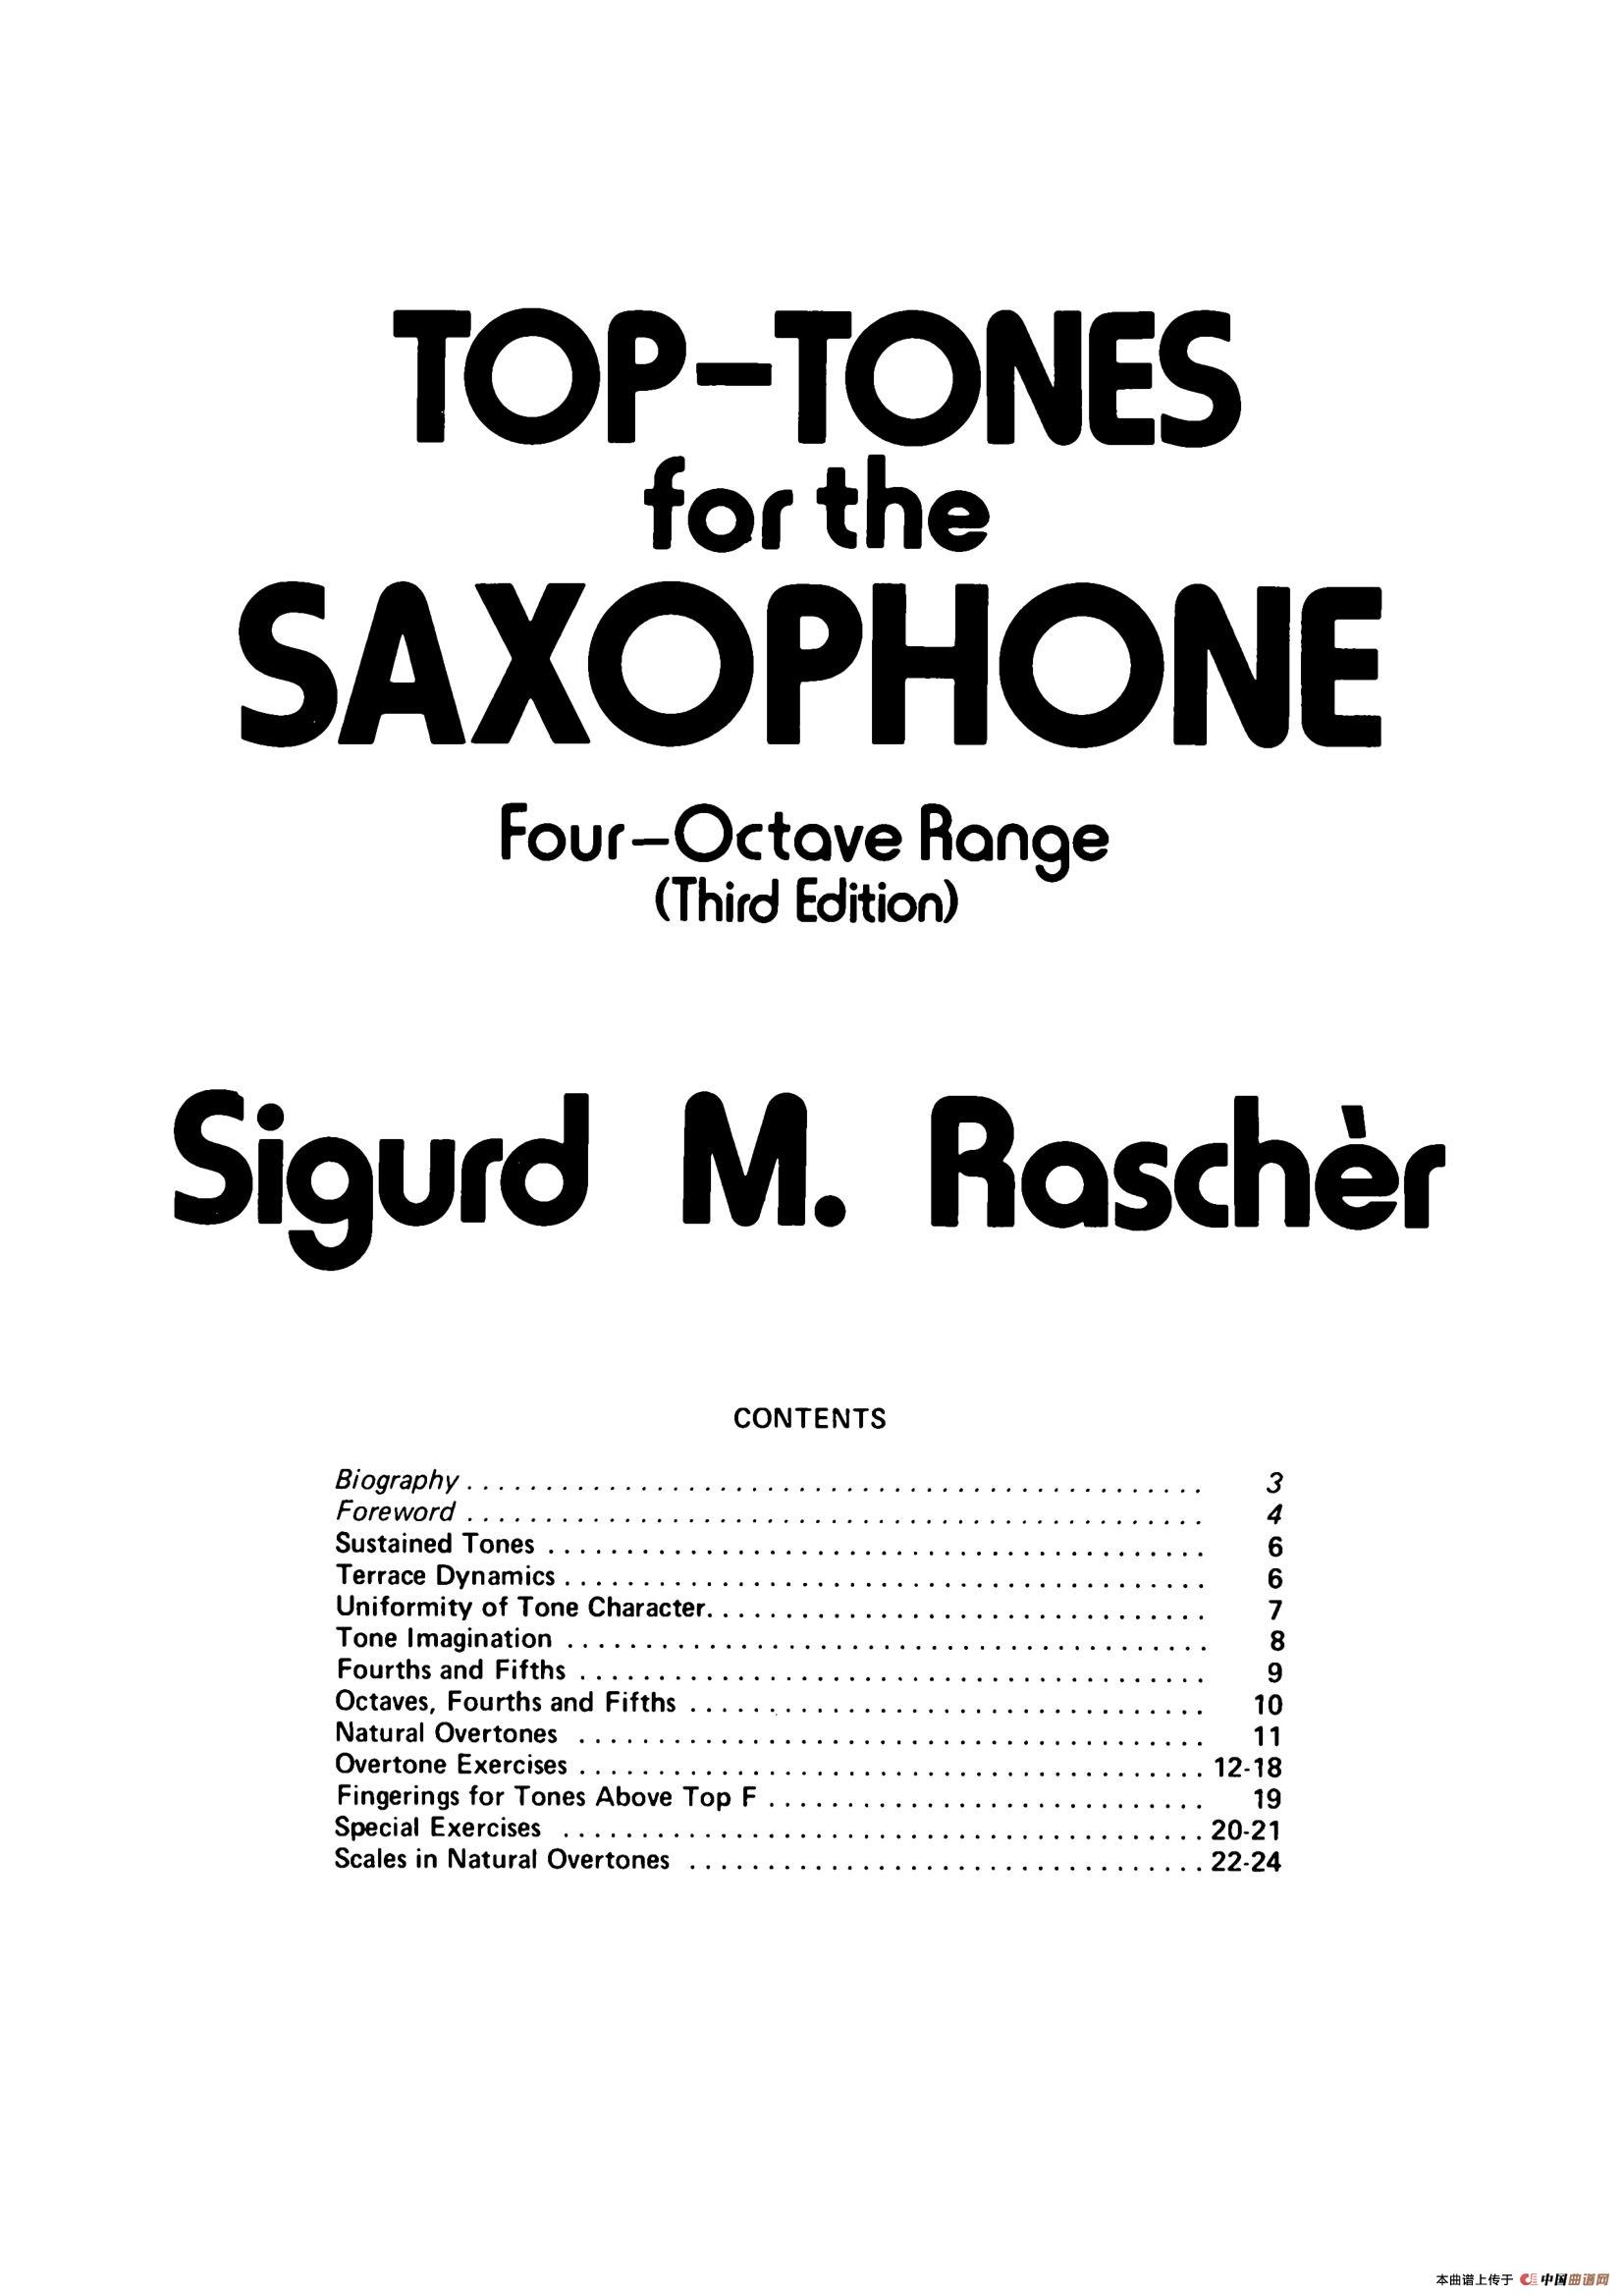 Top Tones for the Saxophone